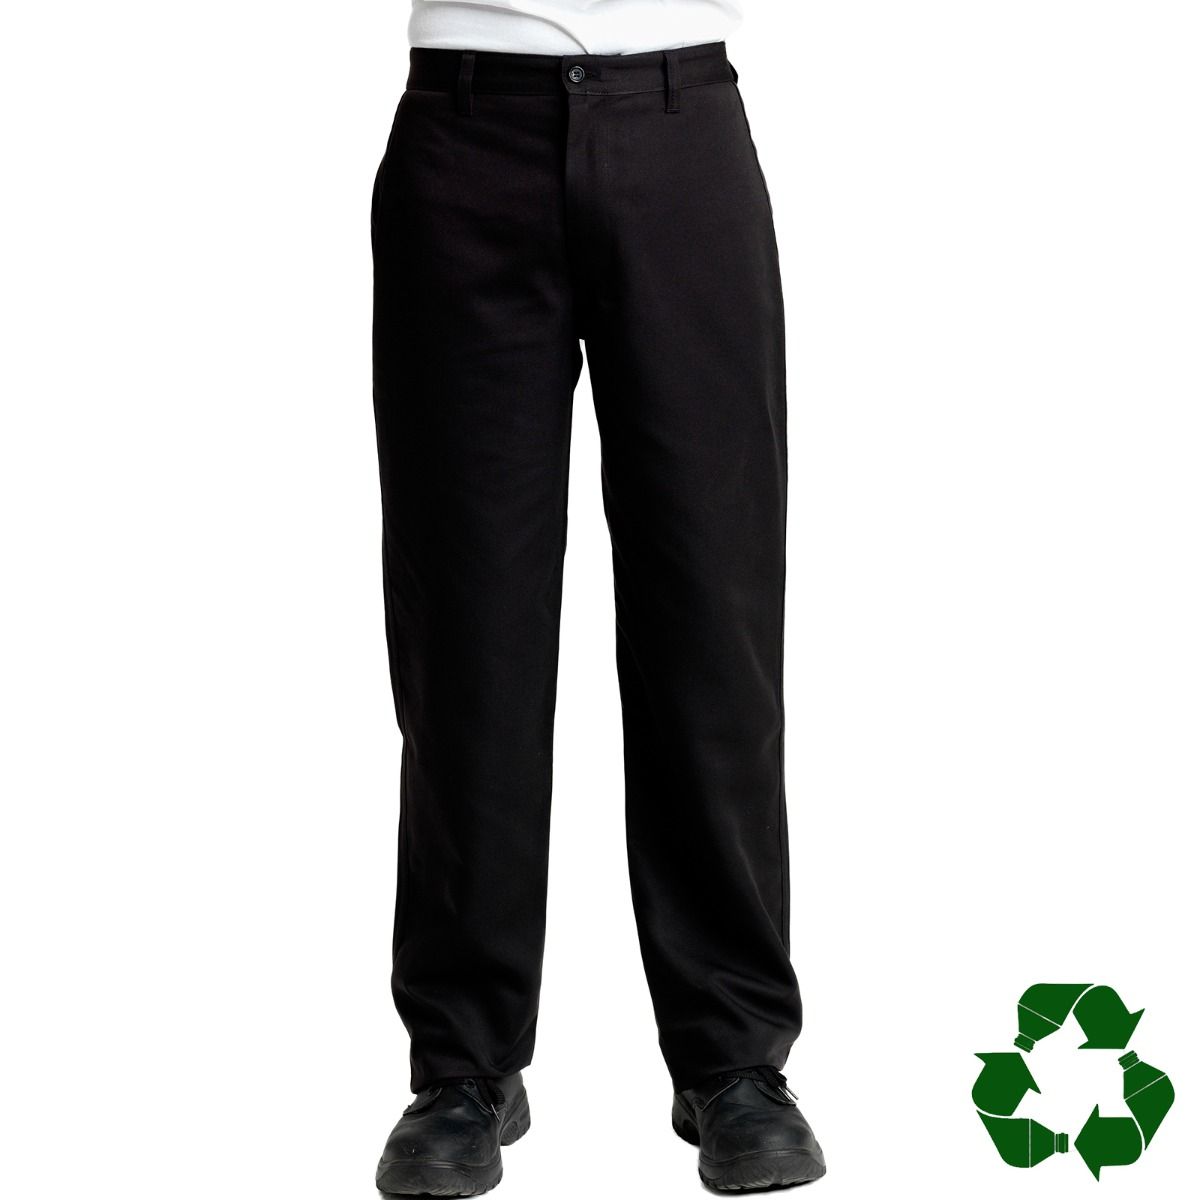 Recycled Chino Style Work Trousers (Mens/Unisex)